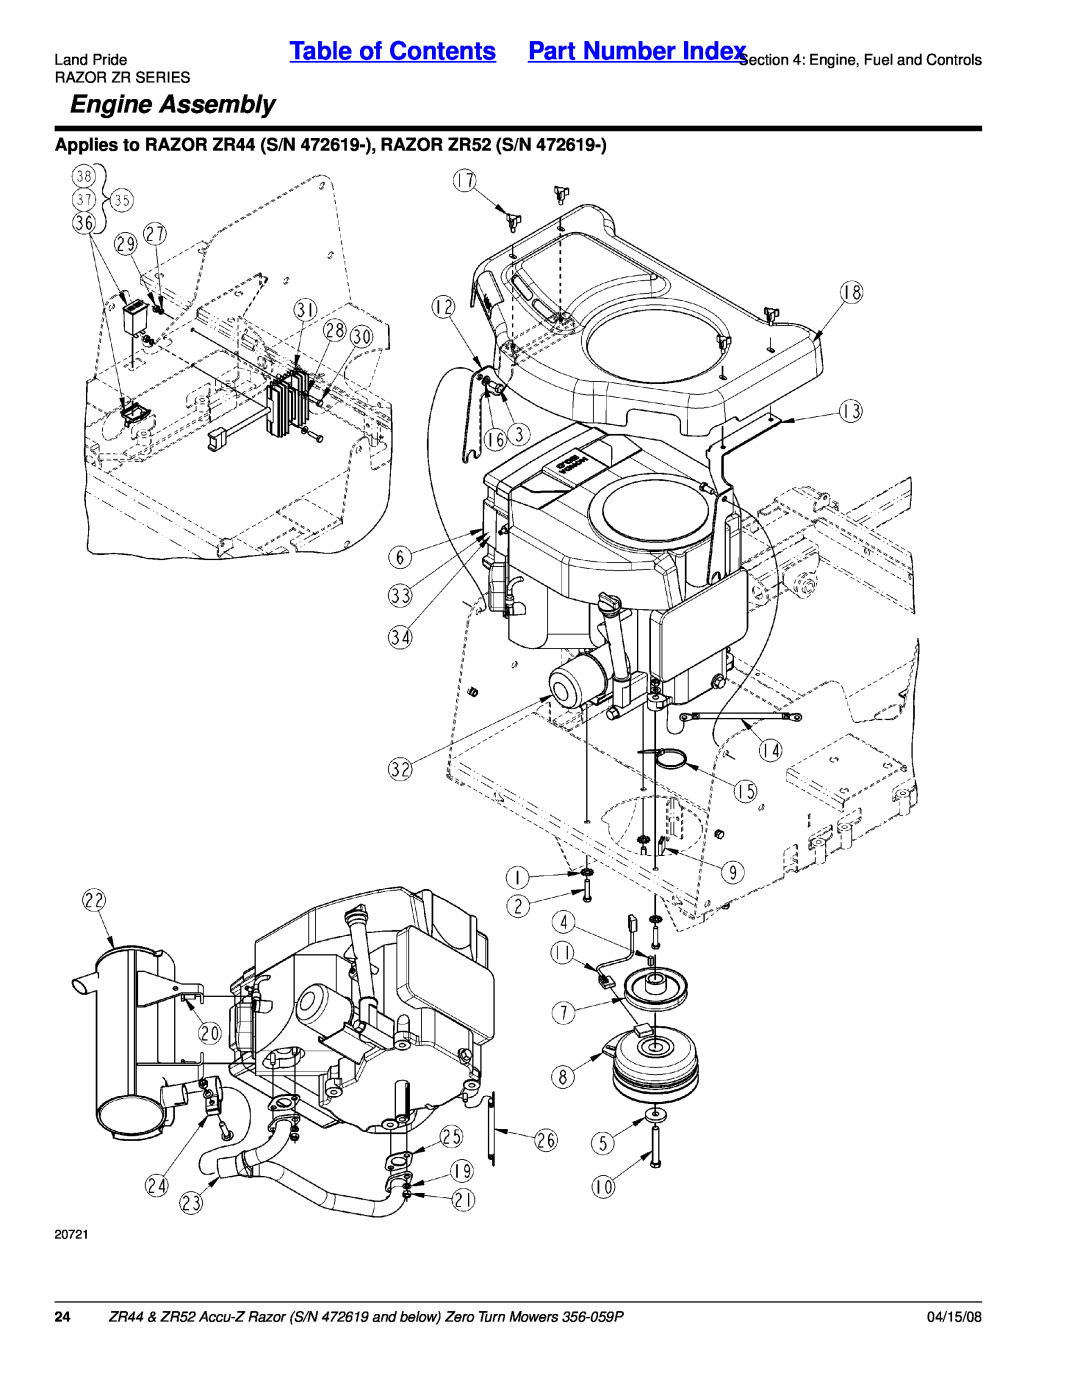 Land Pride manual Engine Assembly, Table of Contents Part Number Index, Applies to RAZOR ZR44 S/N 472619-,RAZOR ZR52 S/N 